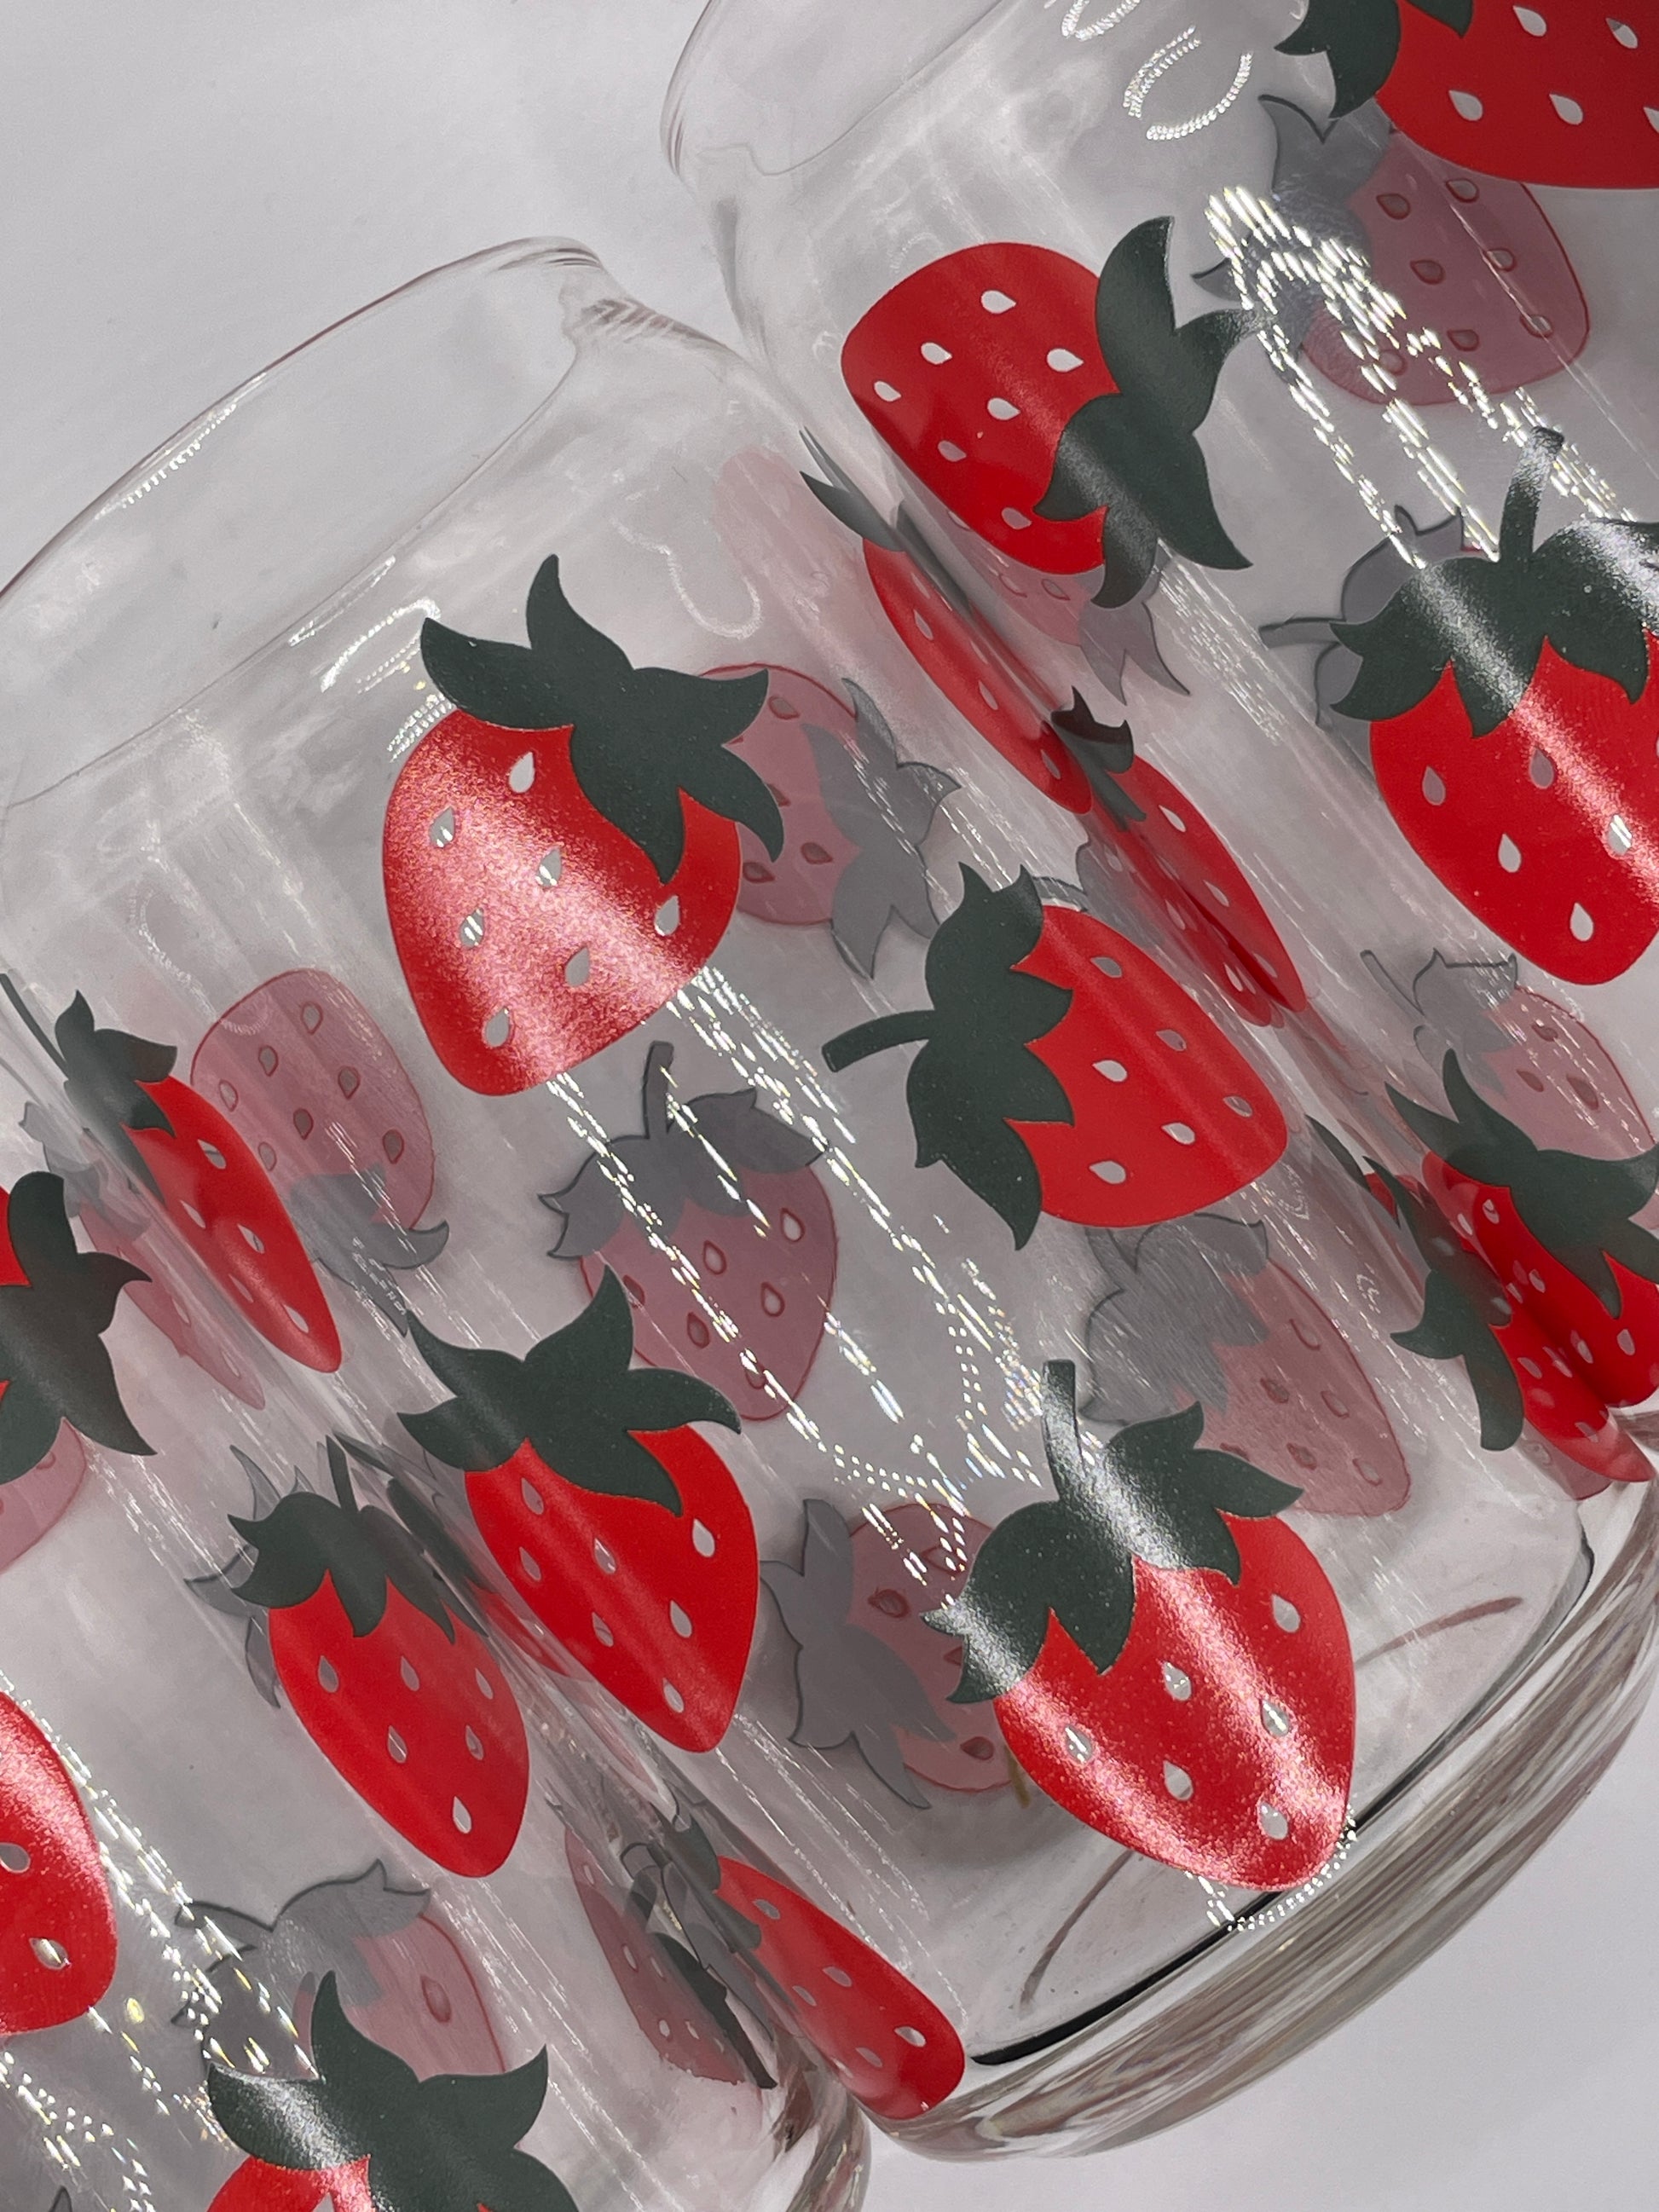 16oz Dishwasher Safe Strawberries Libbey Can Glass – Print Paper